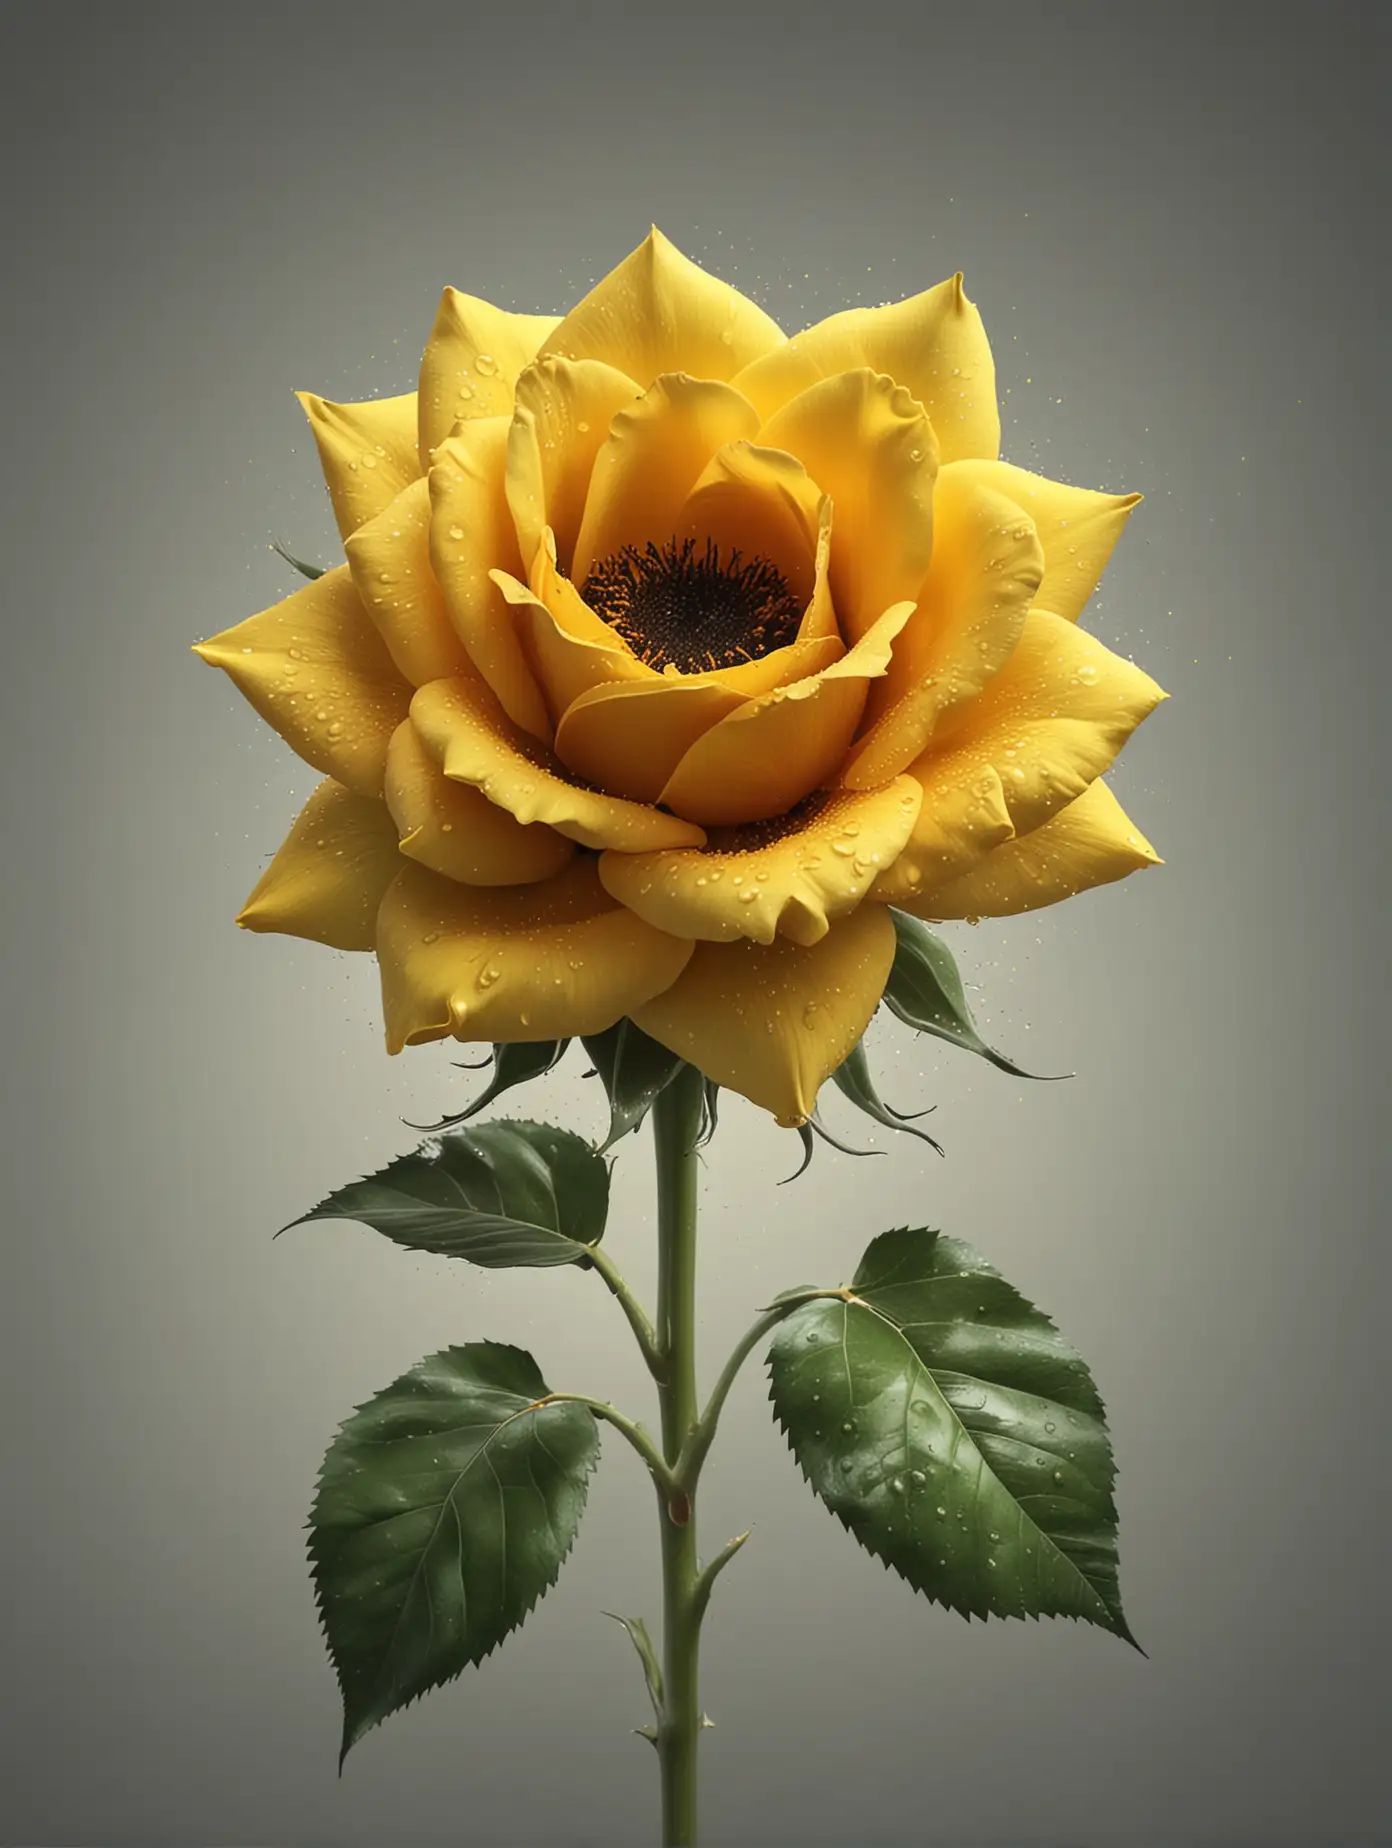 Vibrant Fusion Yellow Rose and Sunflower Hybrid Blossom in 4K Resolution